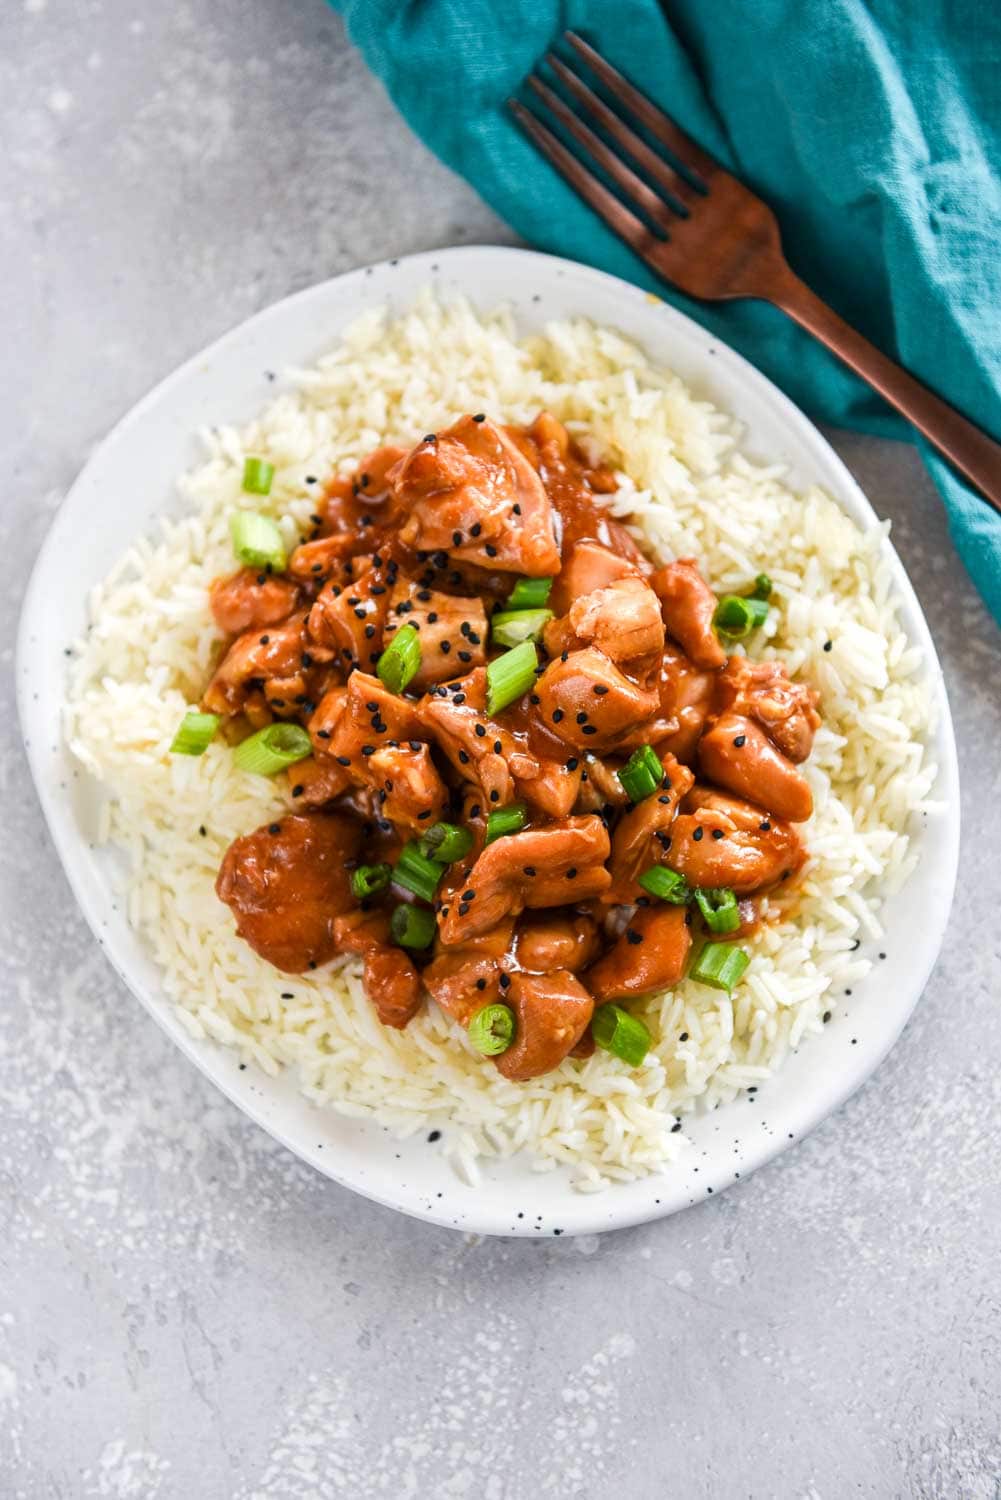 Hawaiian chicken garnished with green onions and black pepper on a bed of white rice